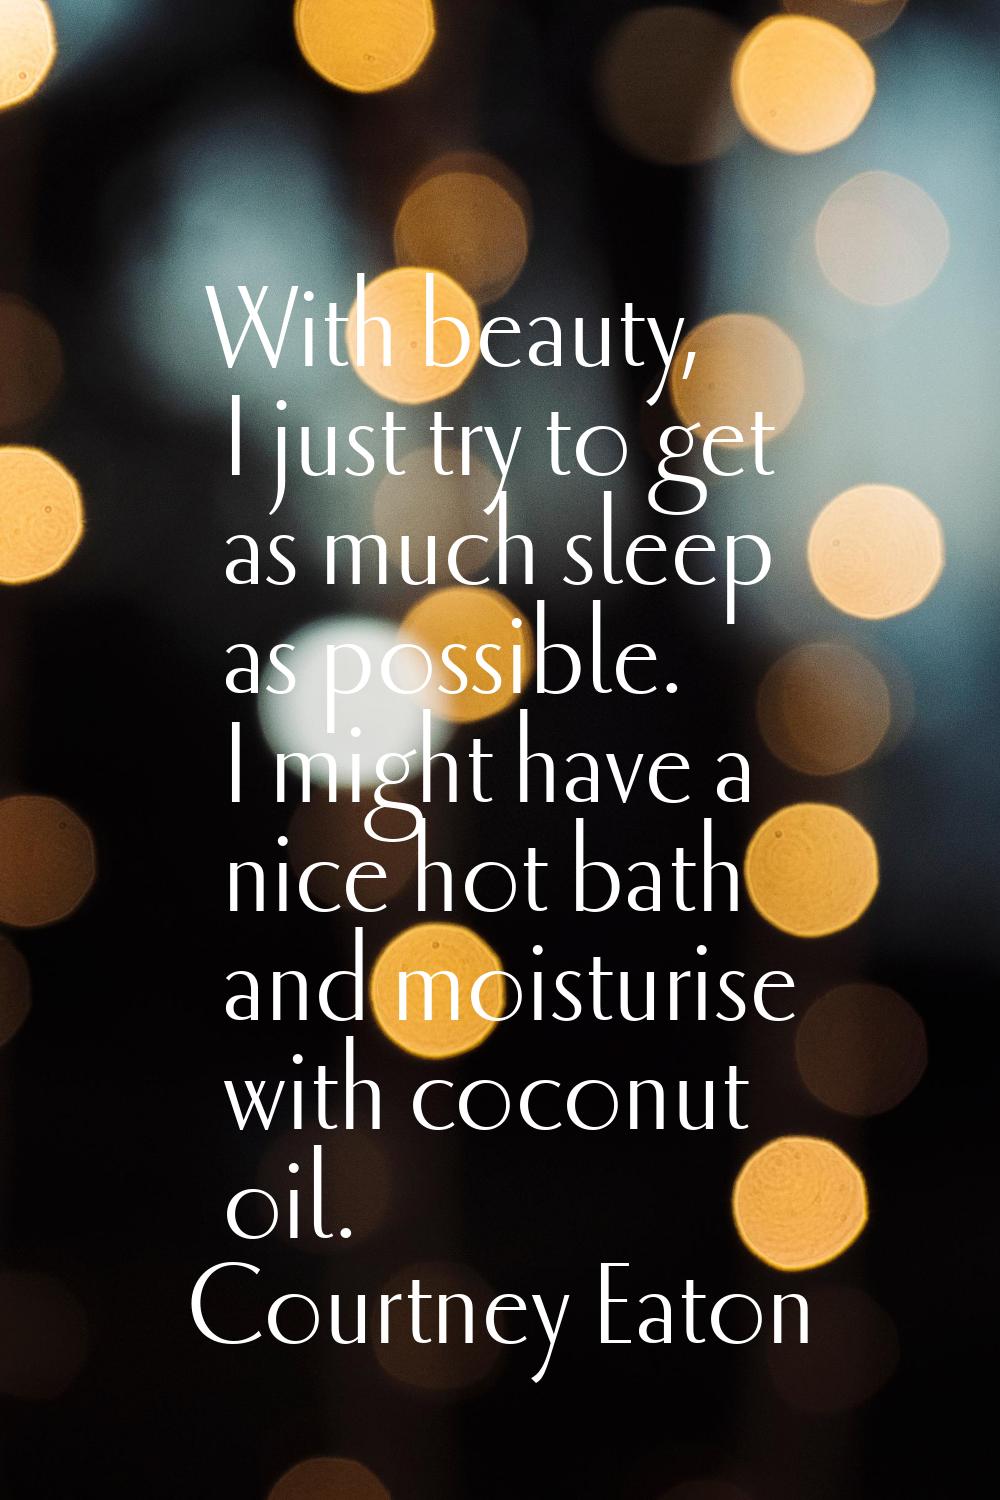 With beauty, I just try to get as much sleep as possible. I might have a nice hot bath and moisturi